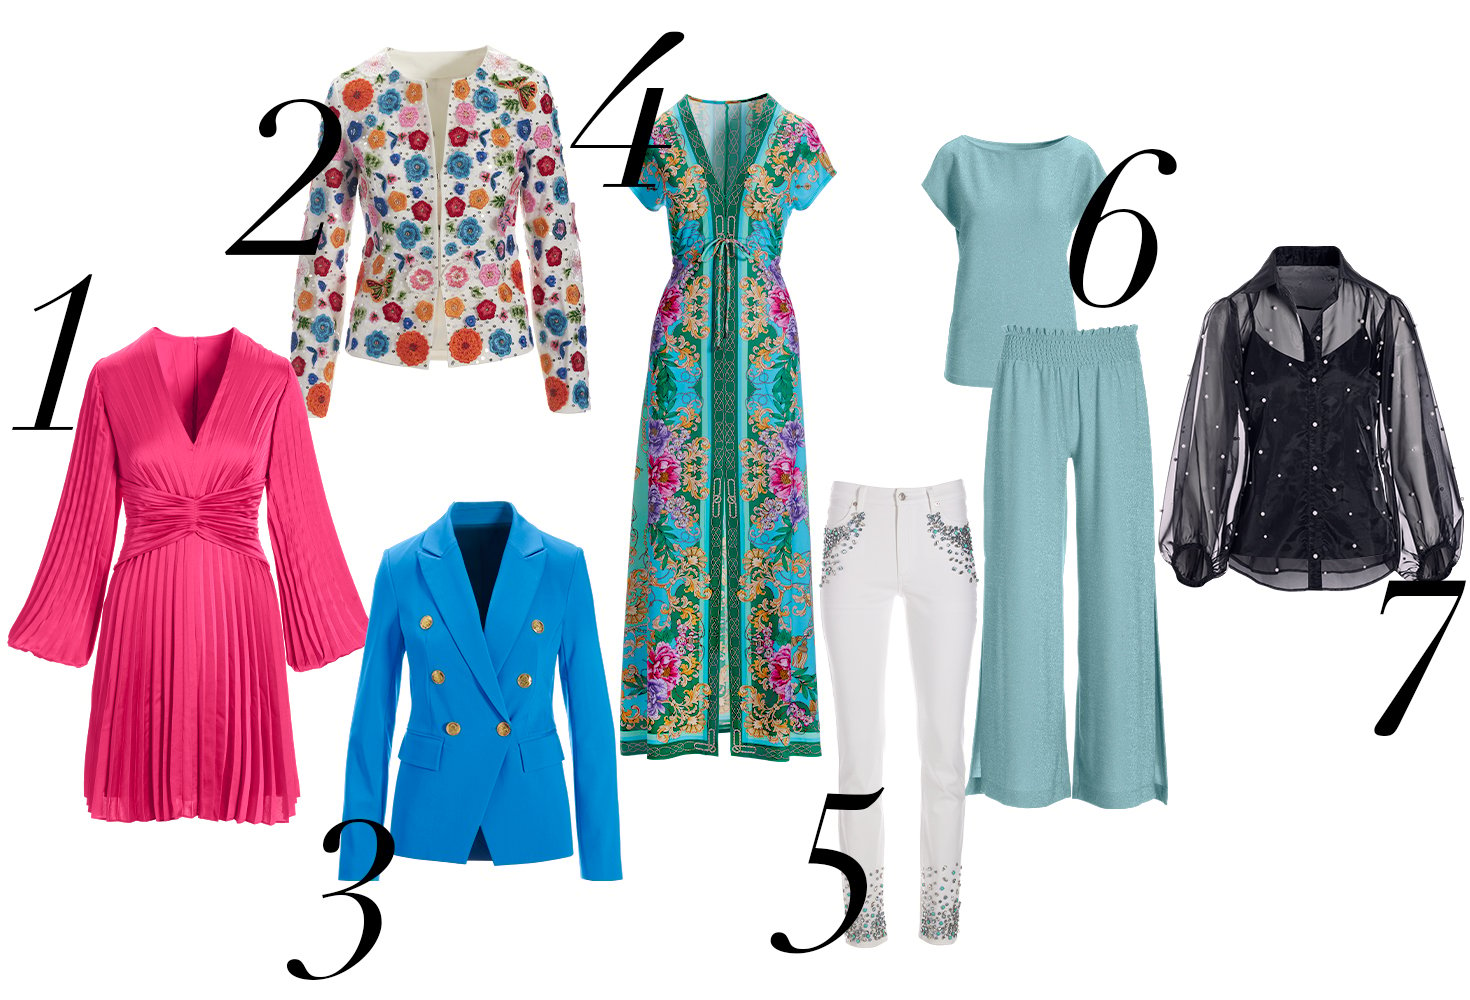 1. Pink pleated long-sleeve v-neck short dress. 2. Floral and butterfly embellished multicolor jacket. 3. Blue double-breasted blazer with gold buttons. 4. Scarf printed multicolor short sleeve maxi dress. 5. Turquoise and crystal embellished white jeans. 6. Light blue matching lounge set. 7. Pearl embellished black organza sheer button-down top with black tank top underneath.